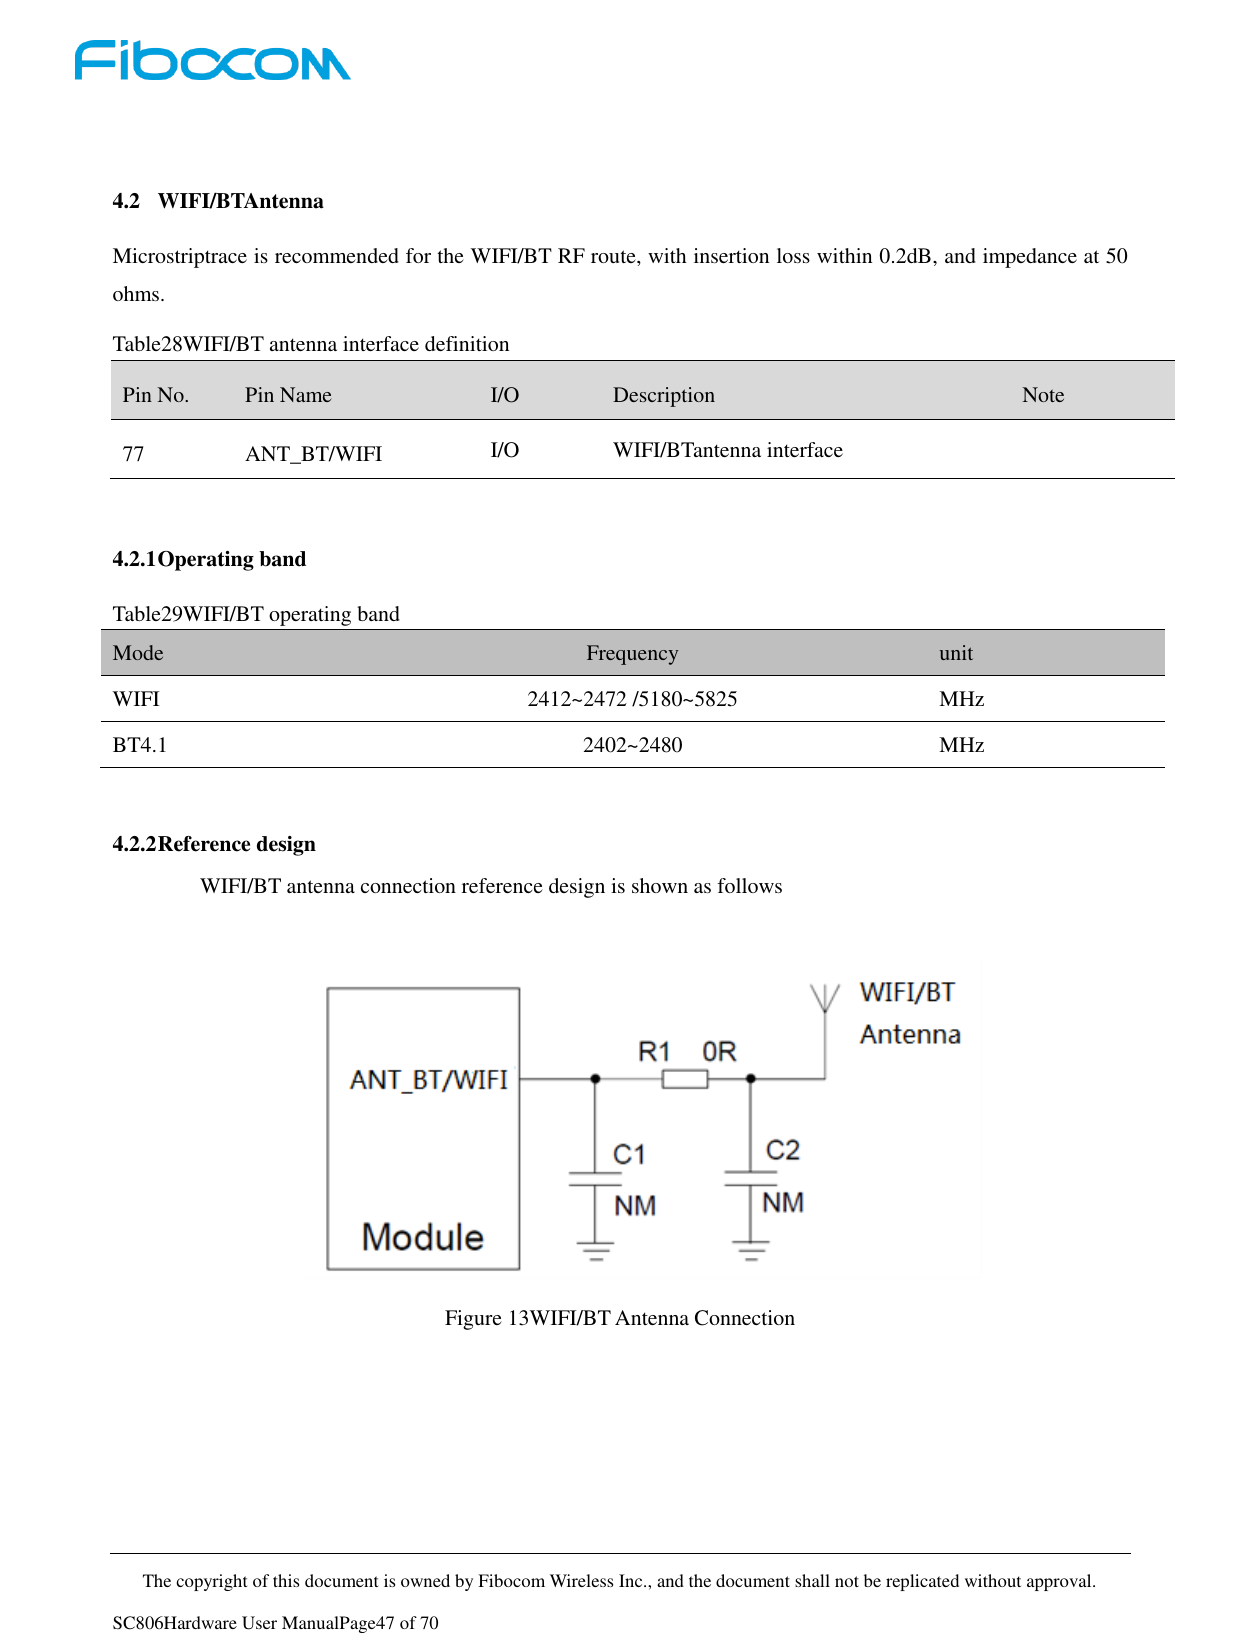     The copyright of this document is owned by Fibocom Wireless Inc., and the document shall not be replicated without approval.   SC806Hardware User ManualPage47 of 70  4.2 WIFI/BTAntenna Microstriptrace is recommended for the WIFI/BT RF route, with insertion loss within 0.2dB, and impedance at 50 ohms. Table28WIFI/BT antenna interface definition Pin No. Pin Name I/O Description Note 77 ANT_BT/WIFI I/O WIFI/BTantenna interface   4.2.1 Operating band Table29WIFI/BT operating band Mode Frequency unit WIFI 2412~2472 /5180~5825 MHz BT4.1 2402~2480 MHz  4.2.2 Reference design WIFI/BT antenna connection reference design is shown as follows  Figure 13WIFI/BT Antenna Connection    